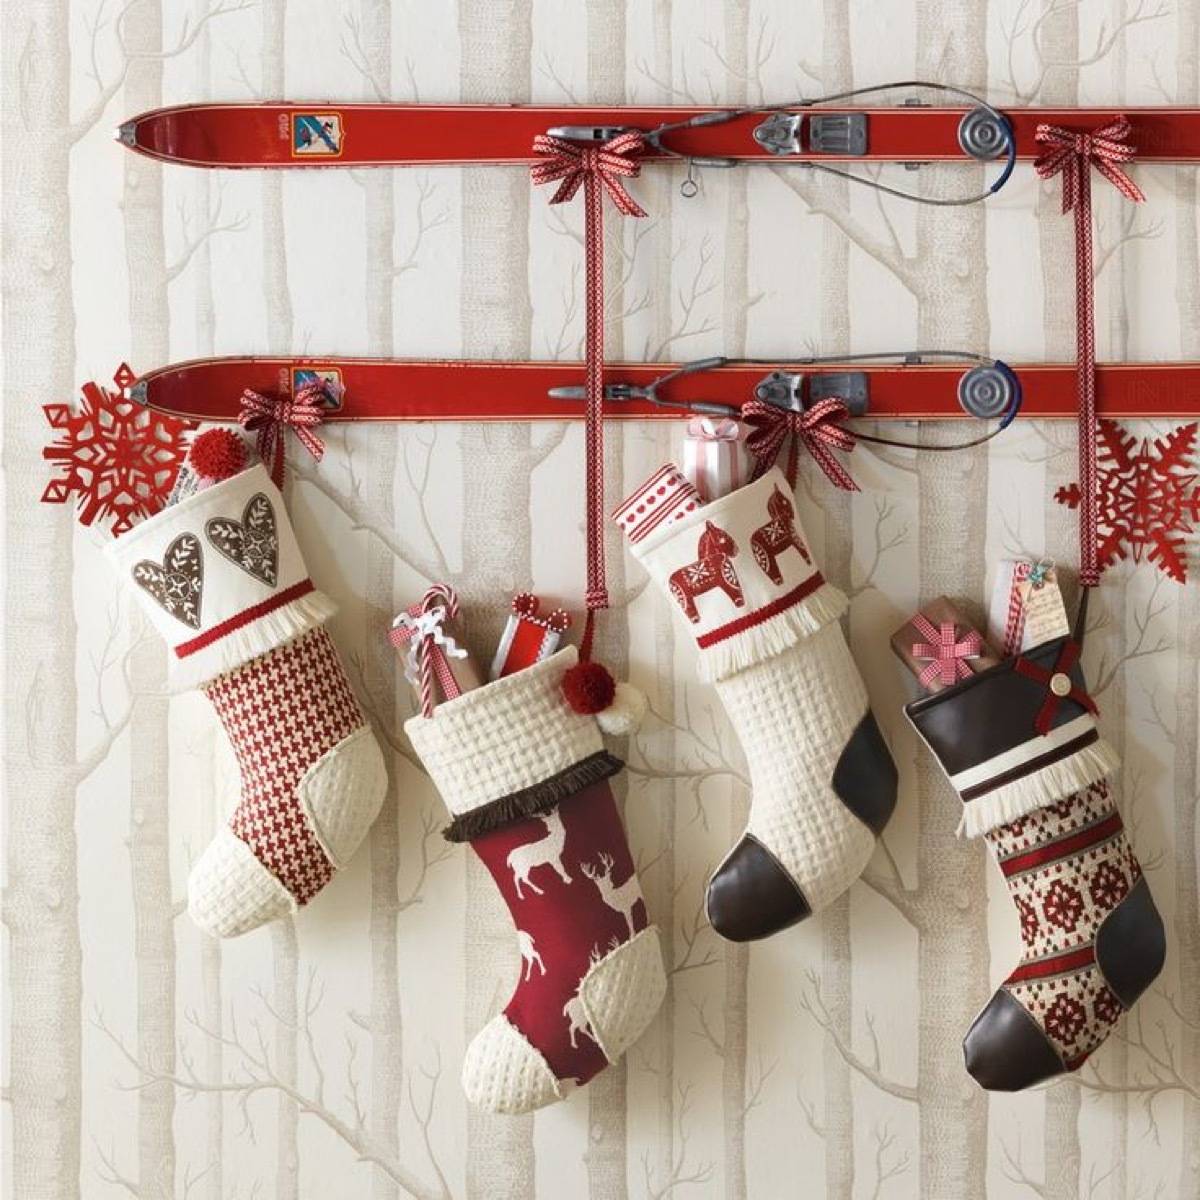 Four Christmas stockings are stuffed and hanging from a red bar on the wall.